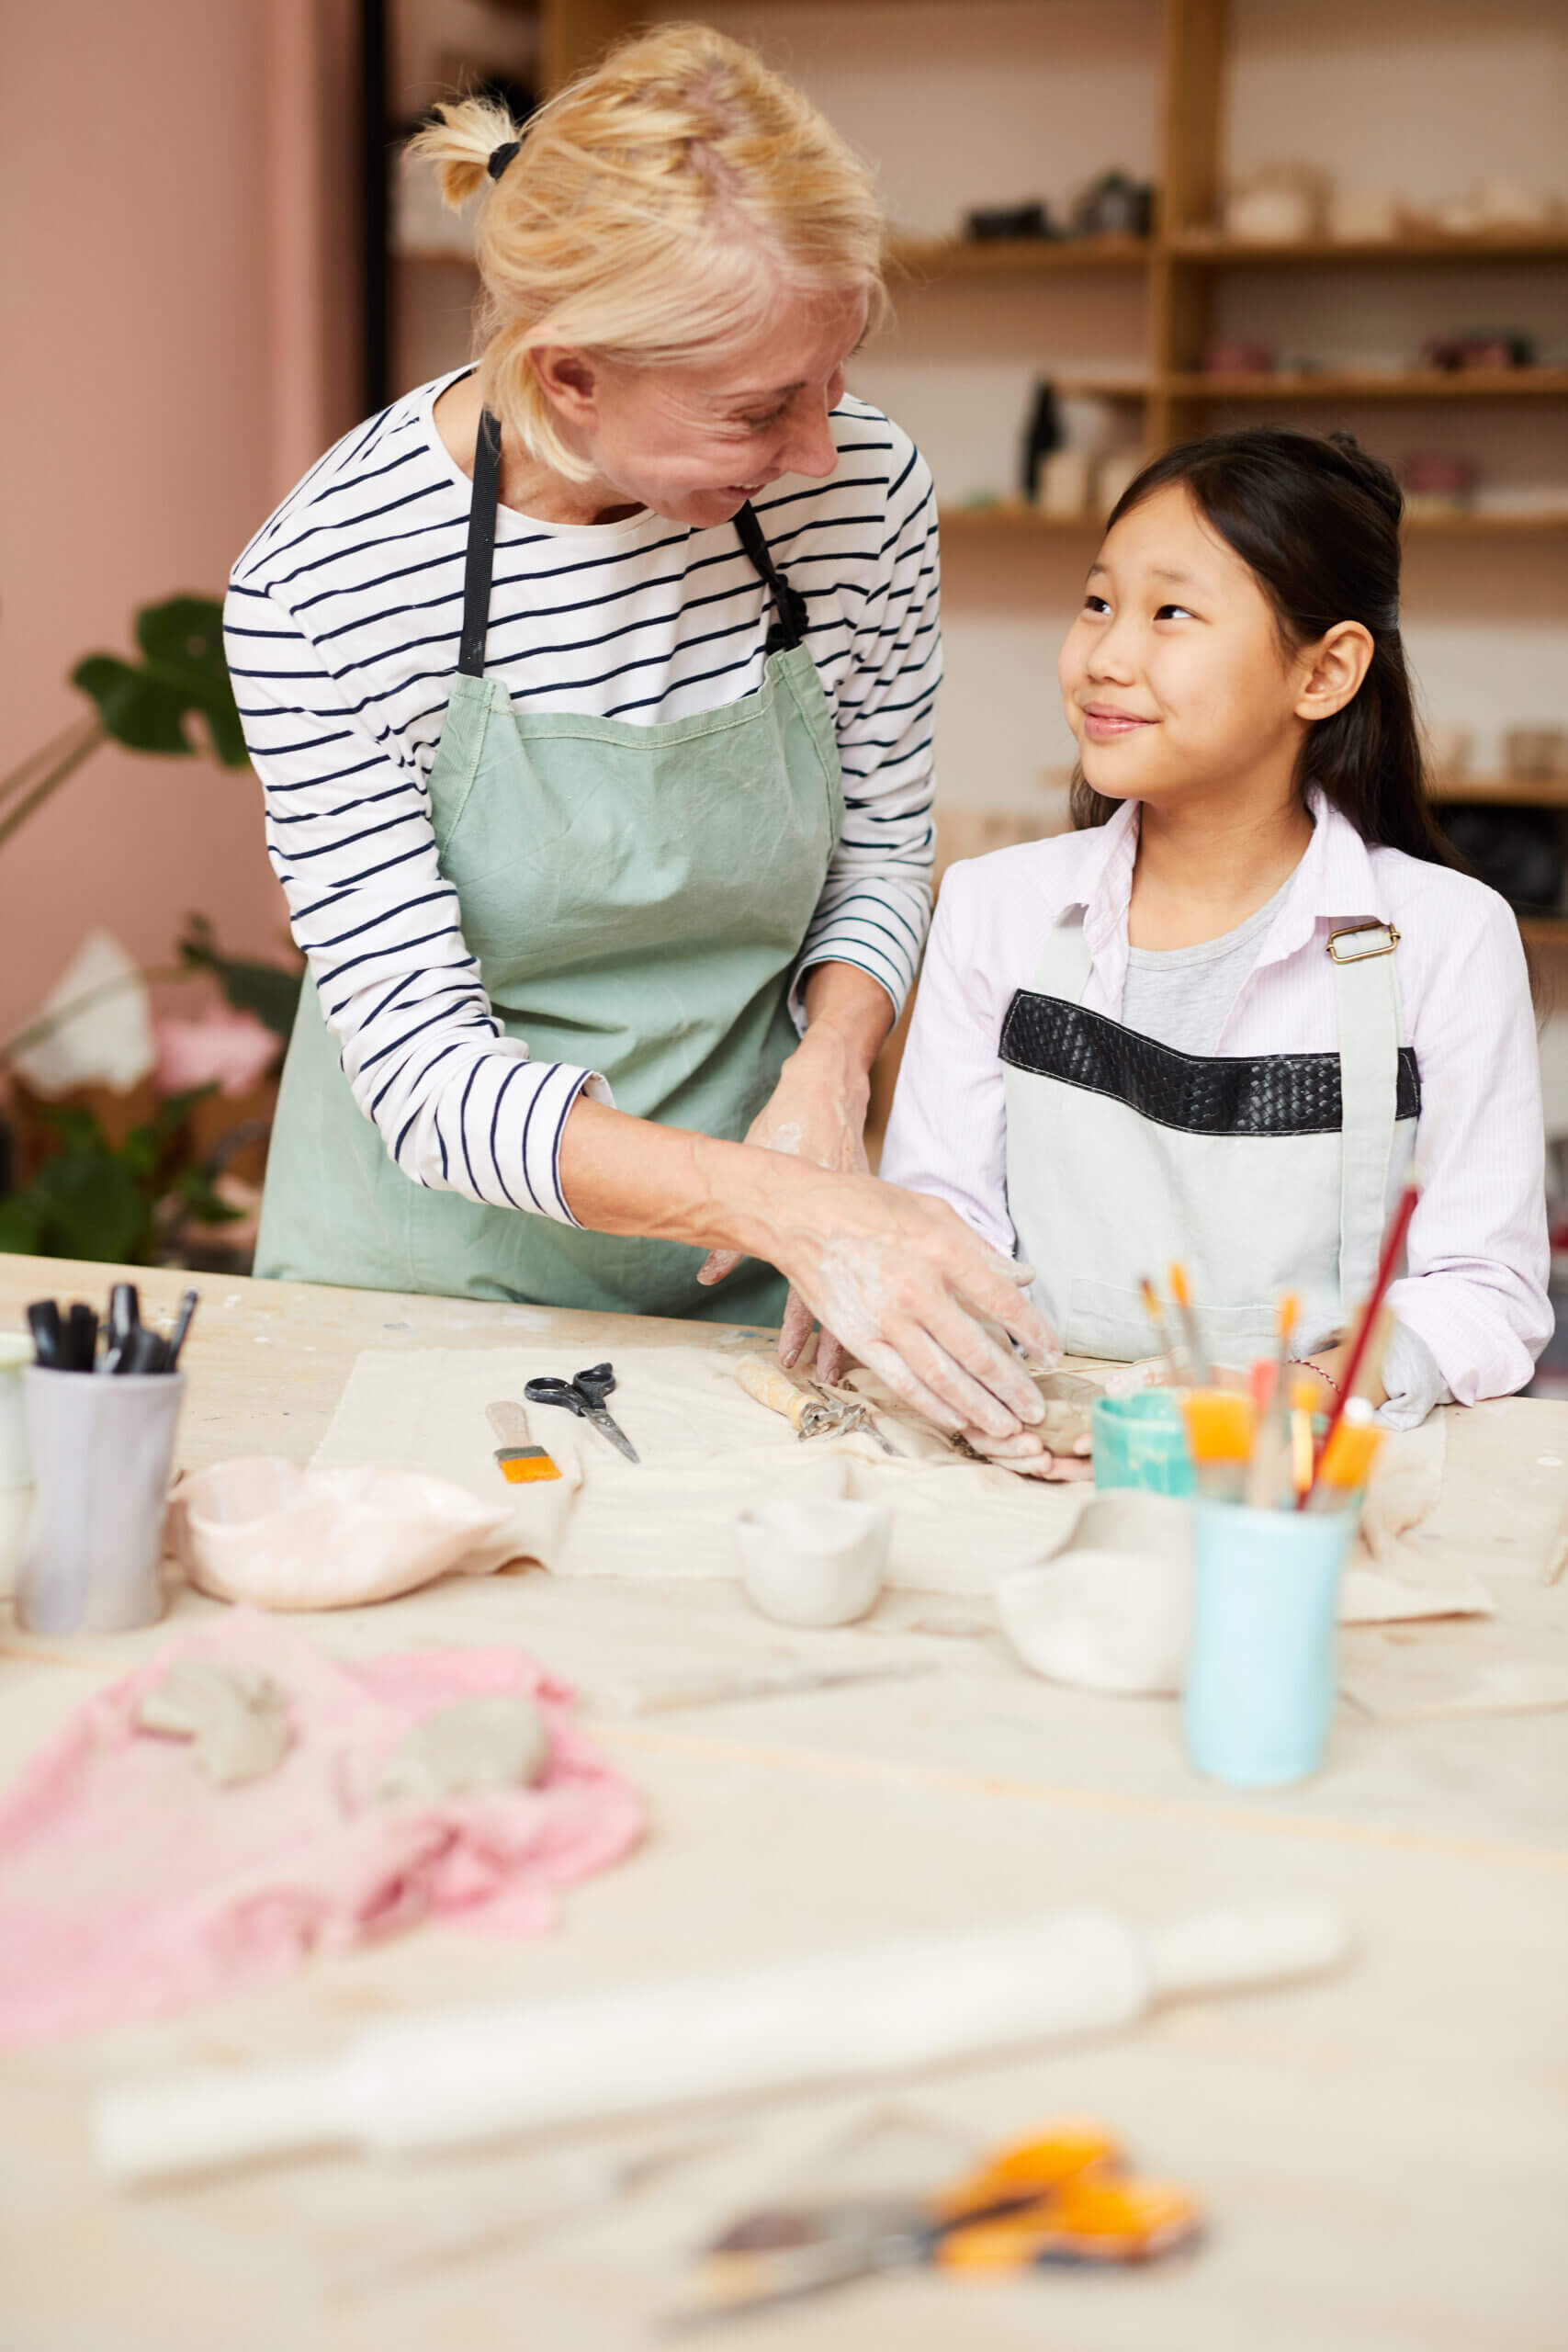 governess jobs near me, hire a governess, governess services